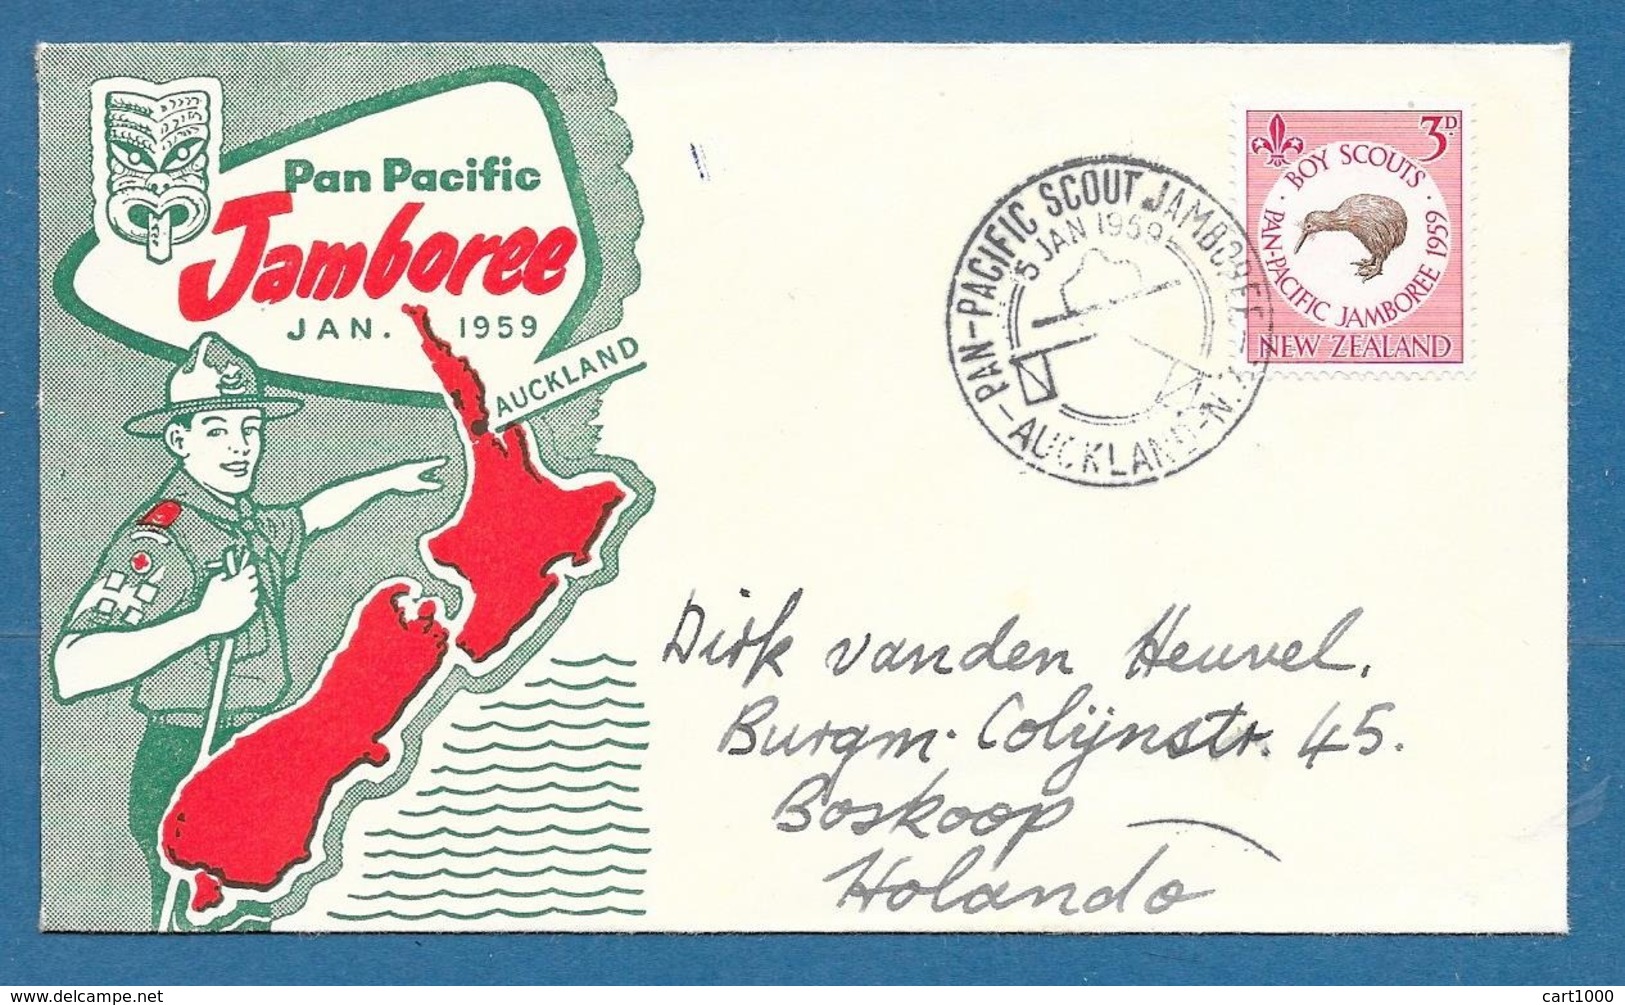 FDC PAN PACIFIC JAMBOREE 1959 BOY SCOUT AUCKLAND - FDC